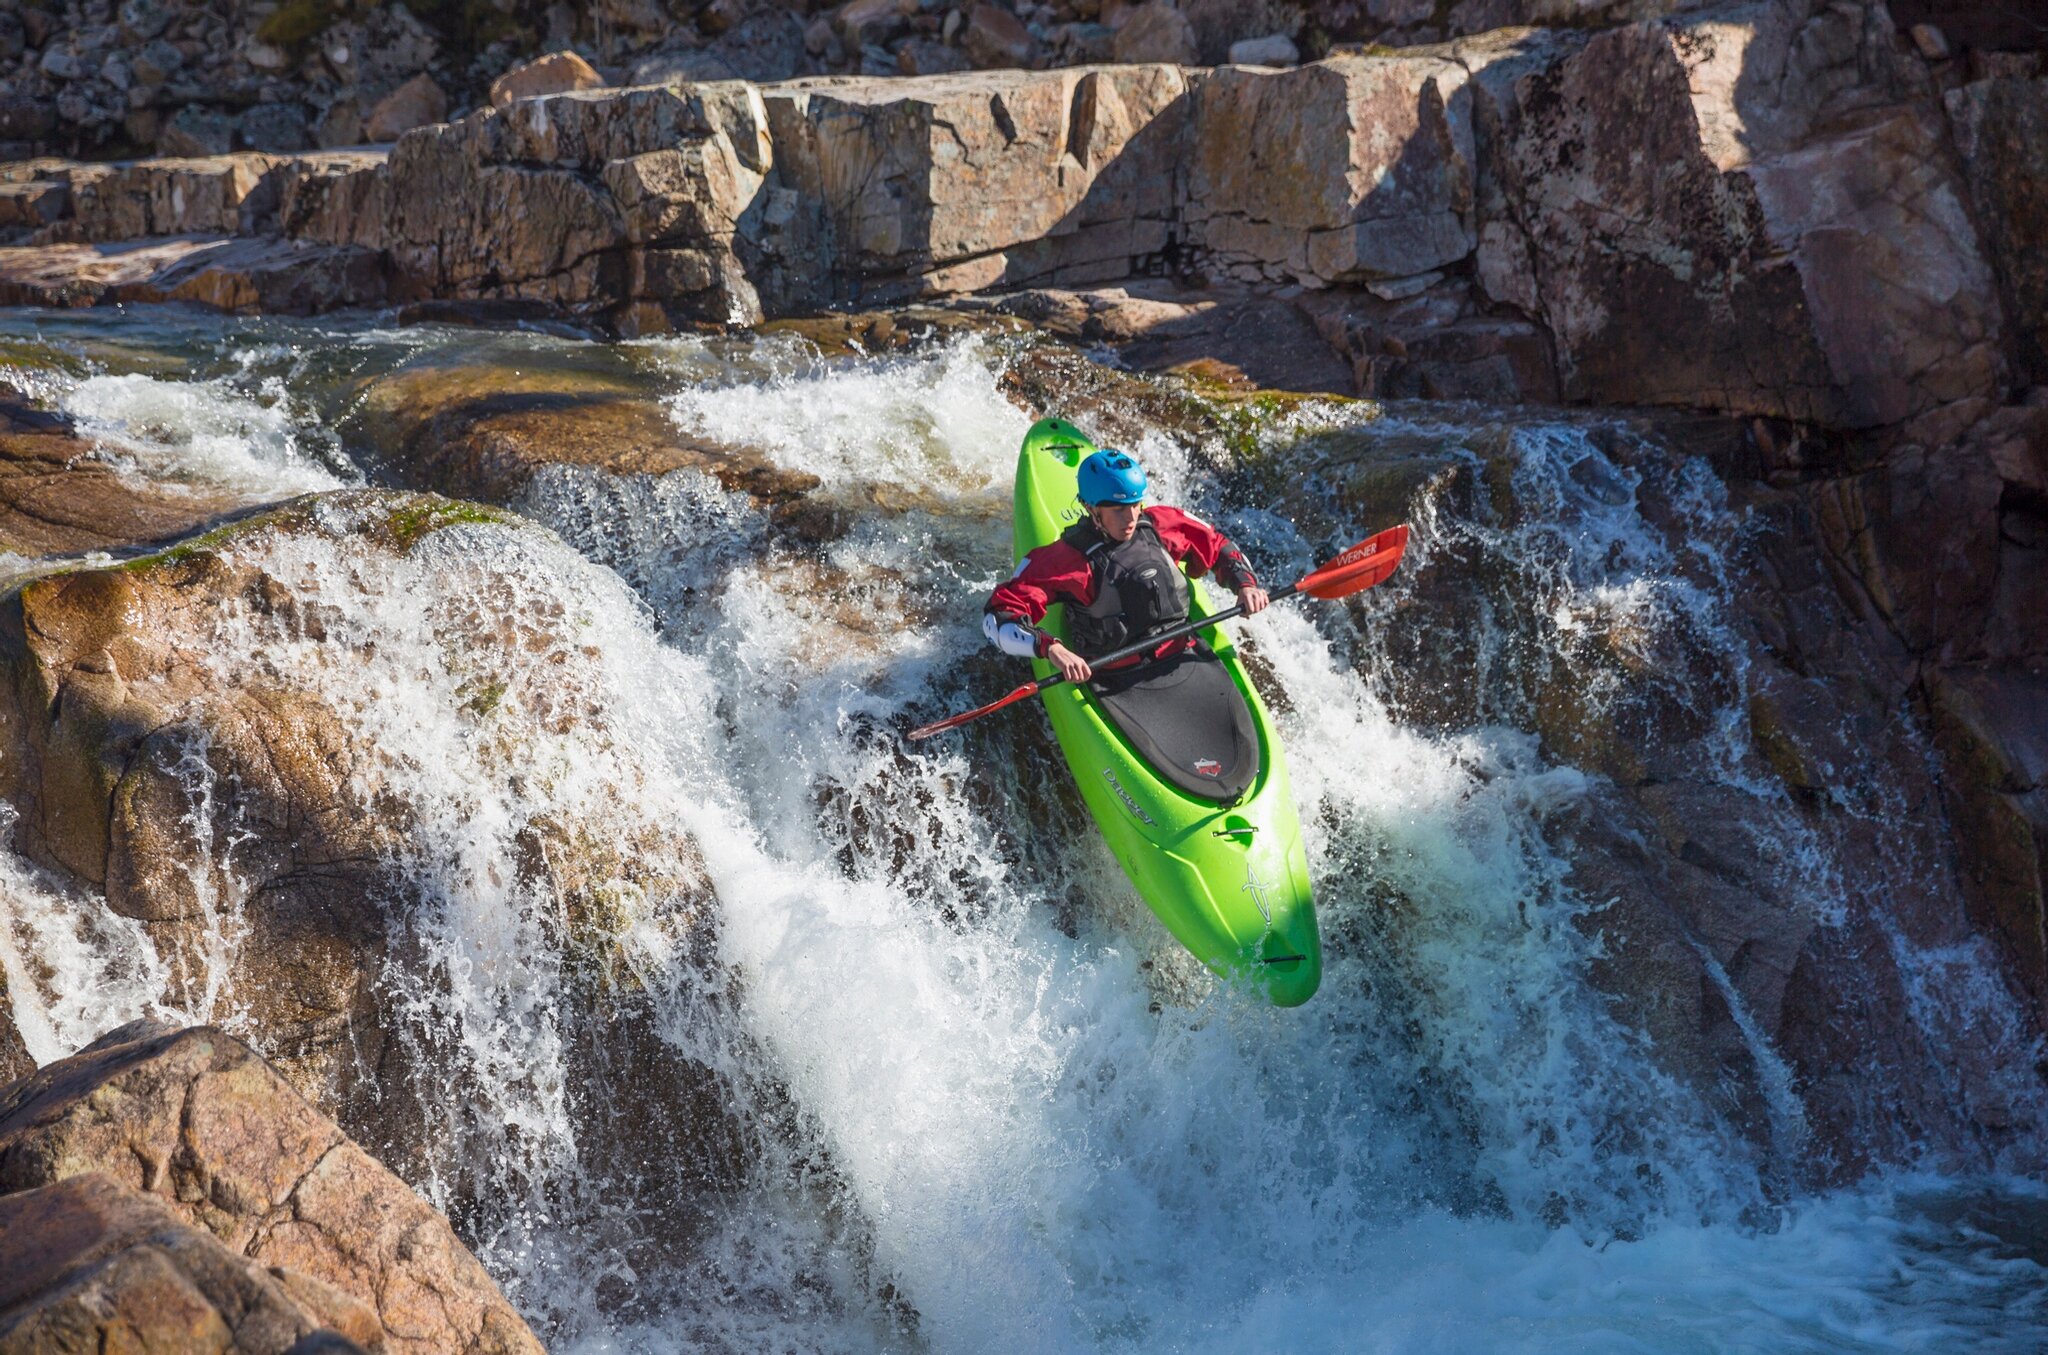 Whitewater kayaking on the River Etive